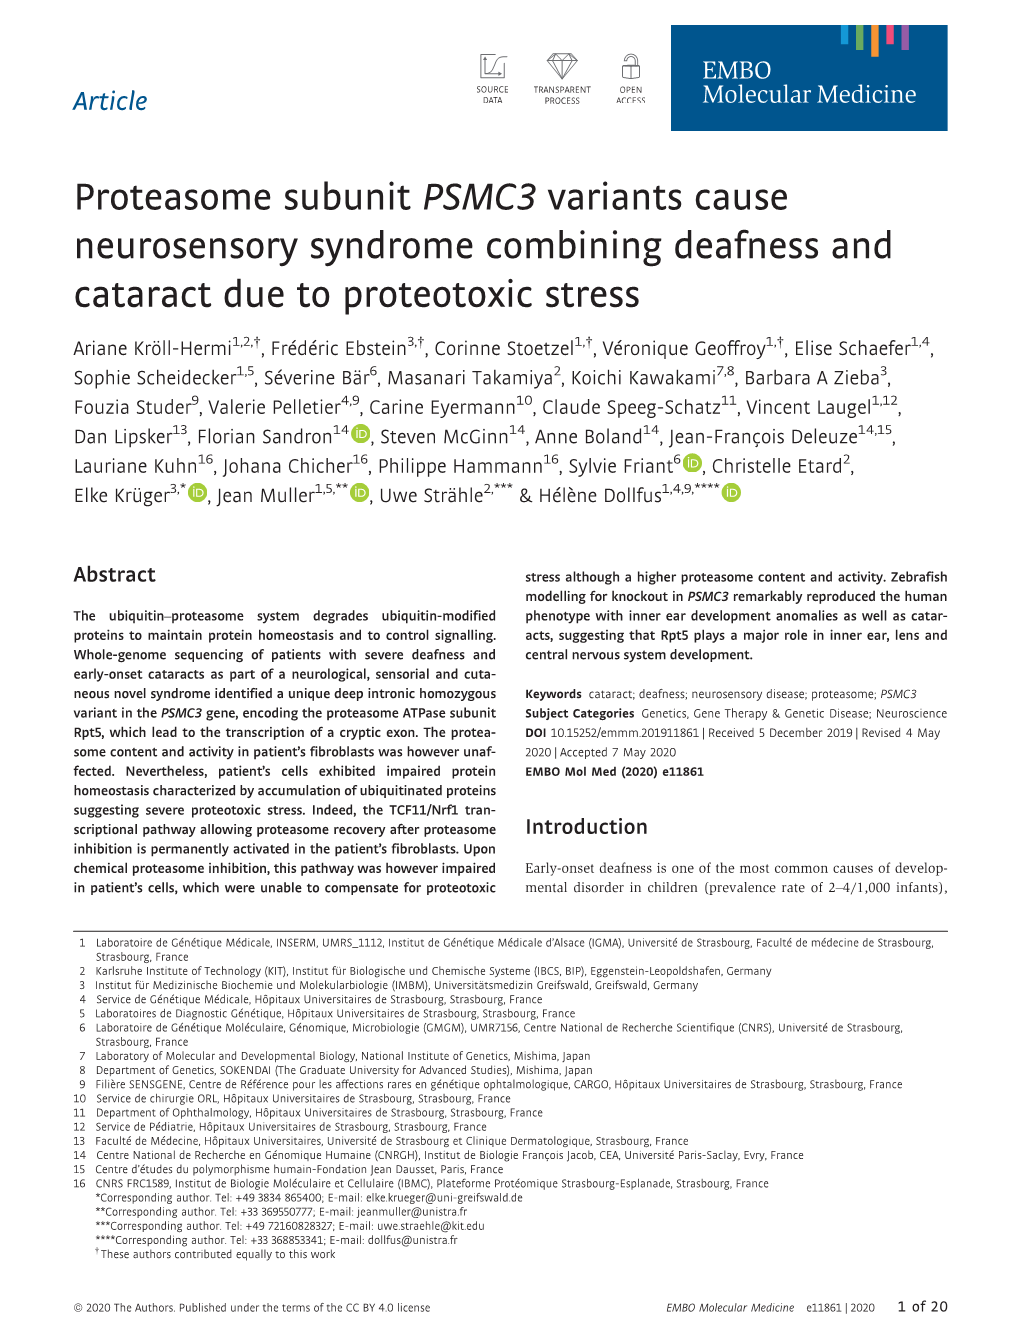 Proteasome Subunit PSMC3 Variants Cause Neurosensory Syndrome Combining Deafness and Cataract Due to Proteotoxic Stress